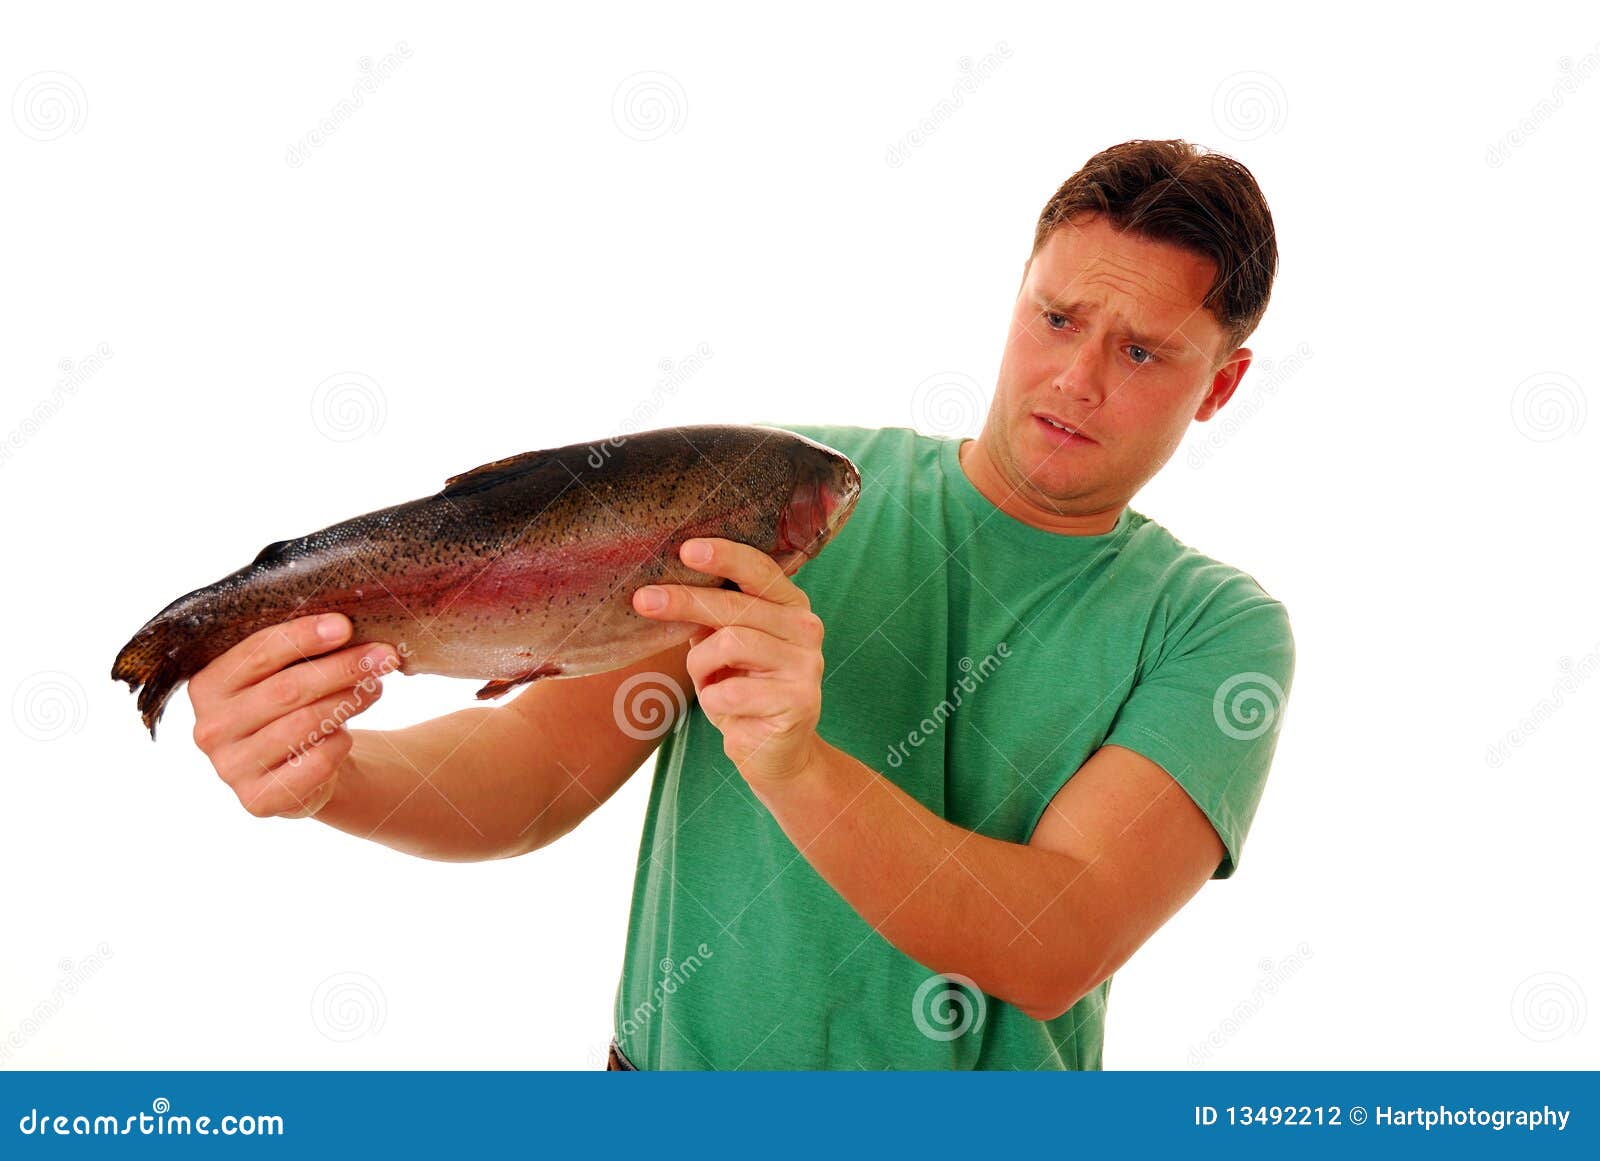 Fish phobia stock photo. Image of scared, gone, smell